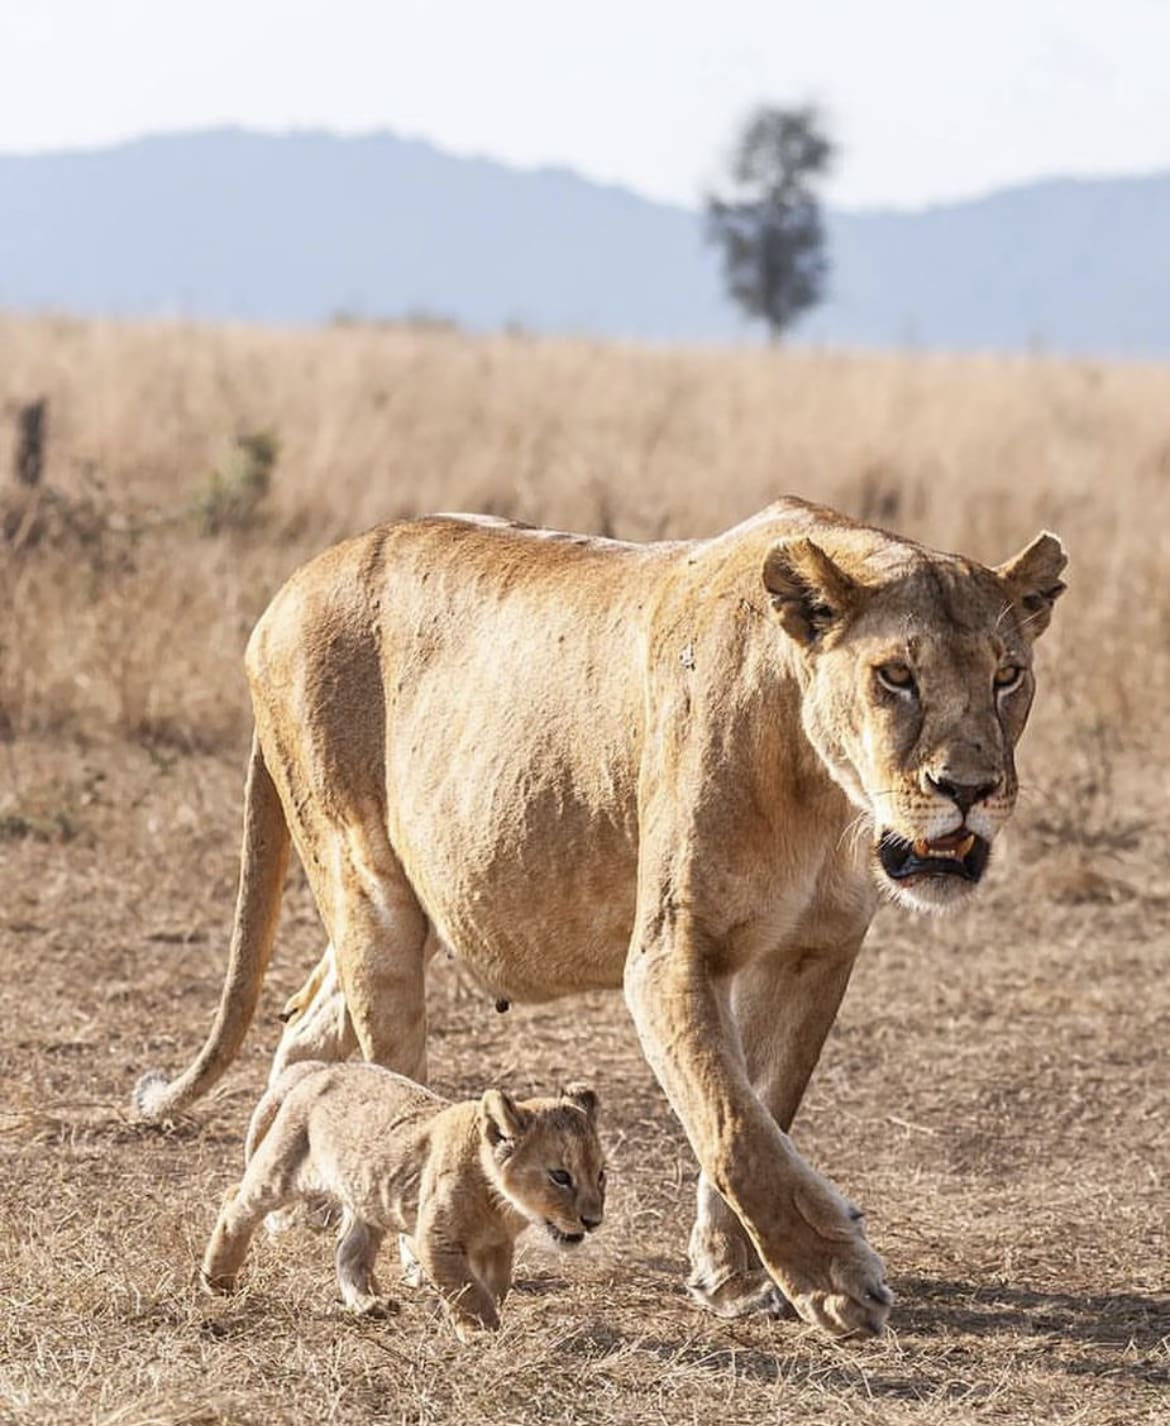 A large lioness and her young cub walk across a clearing the savanna